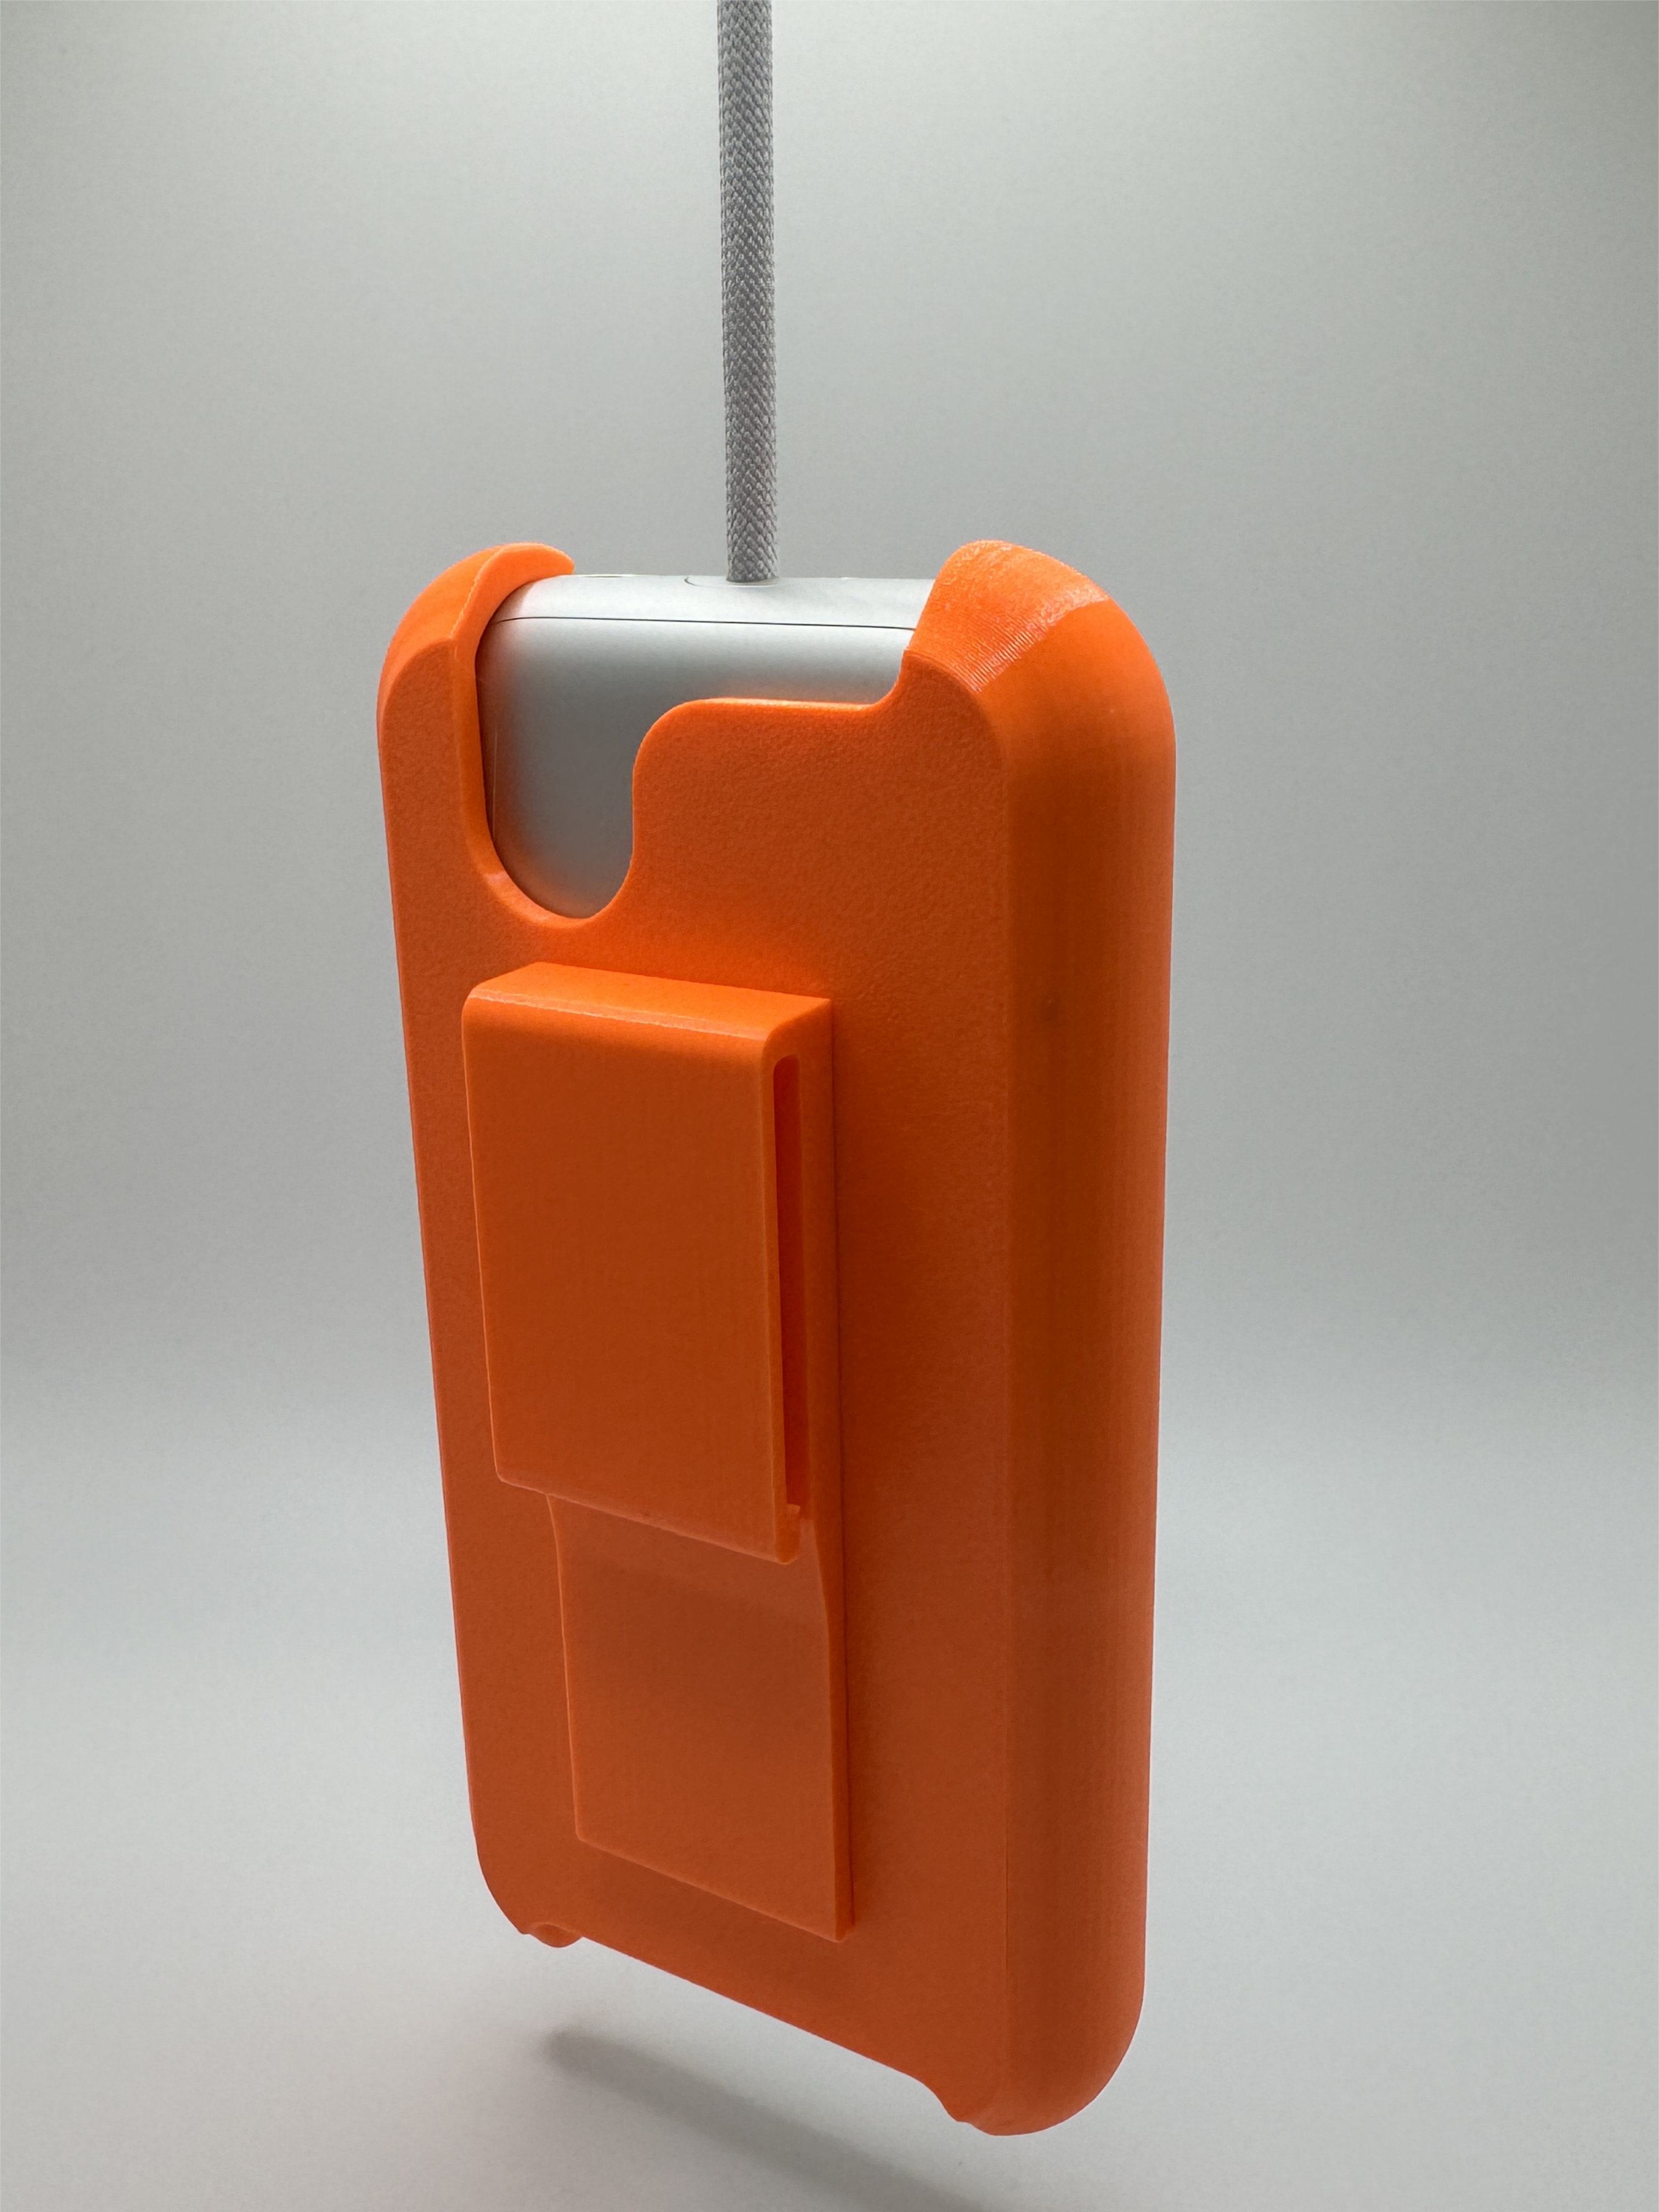 A picture of the holder in Orange